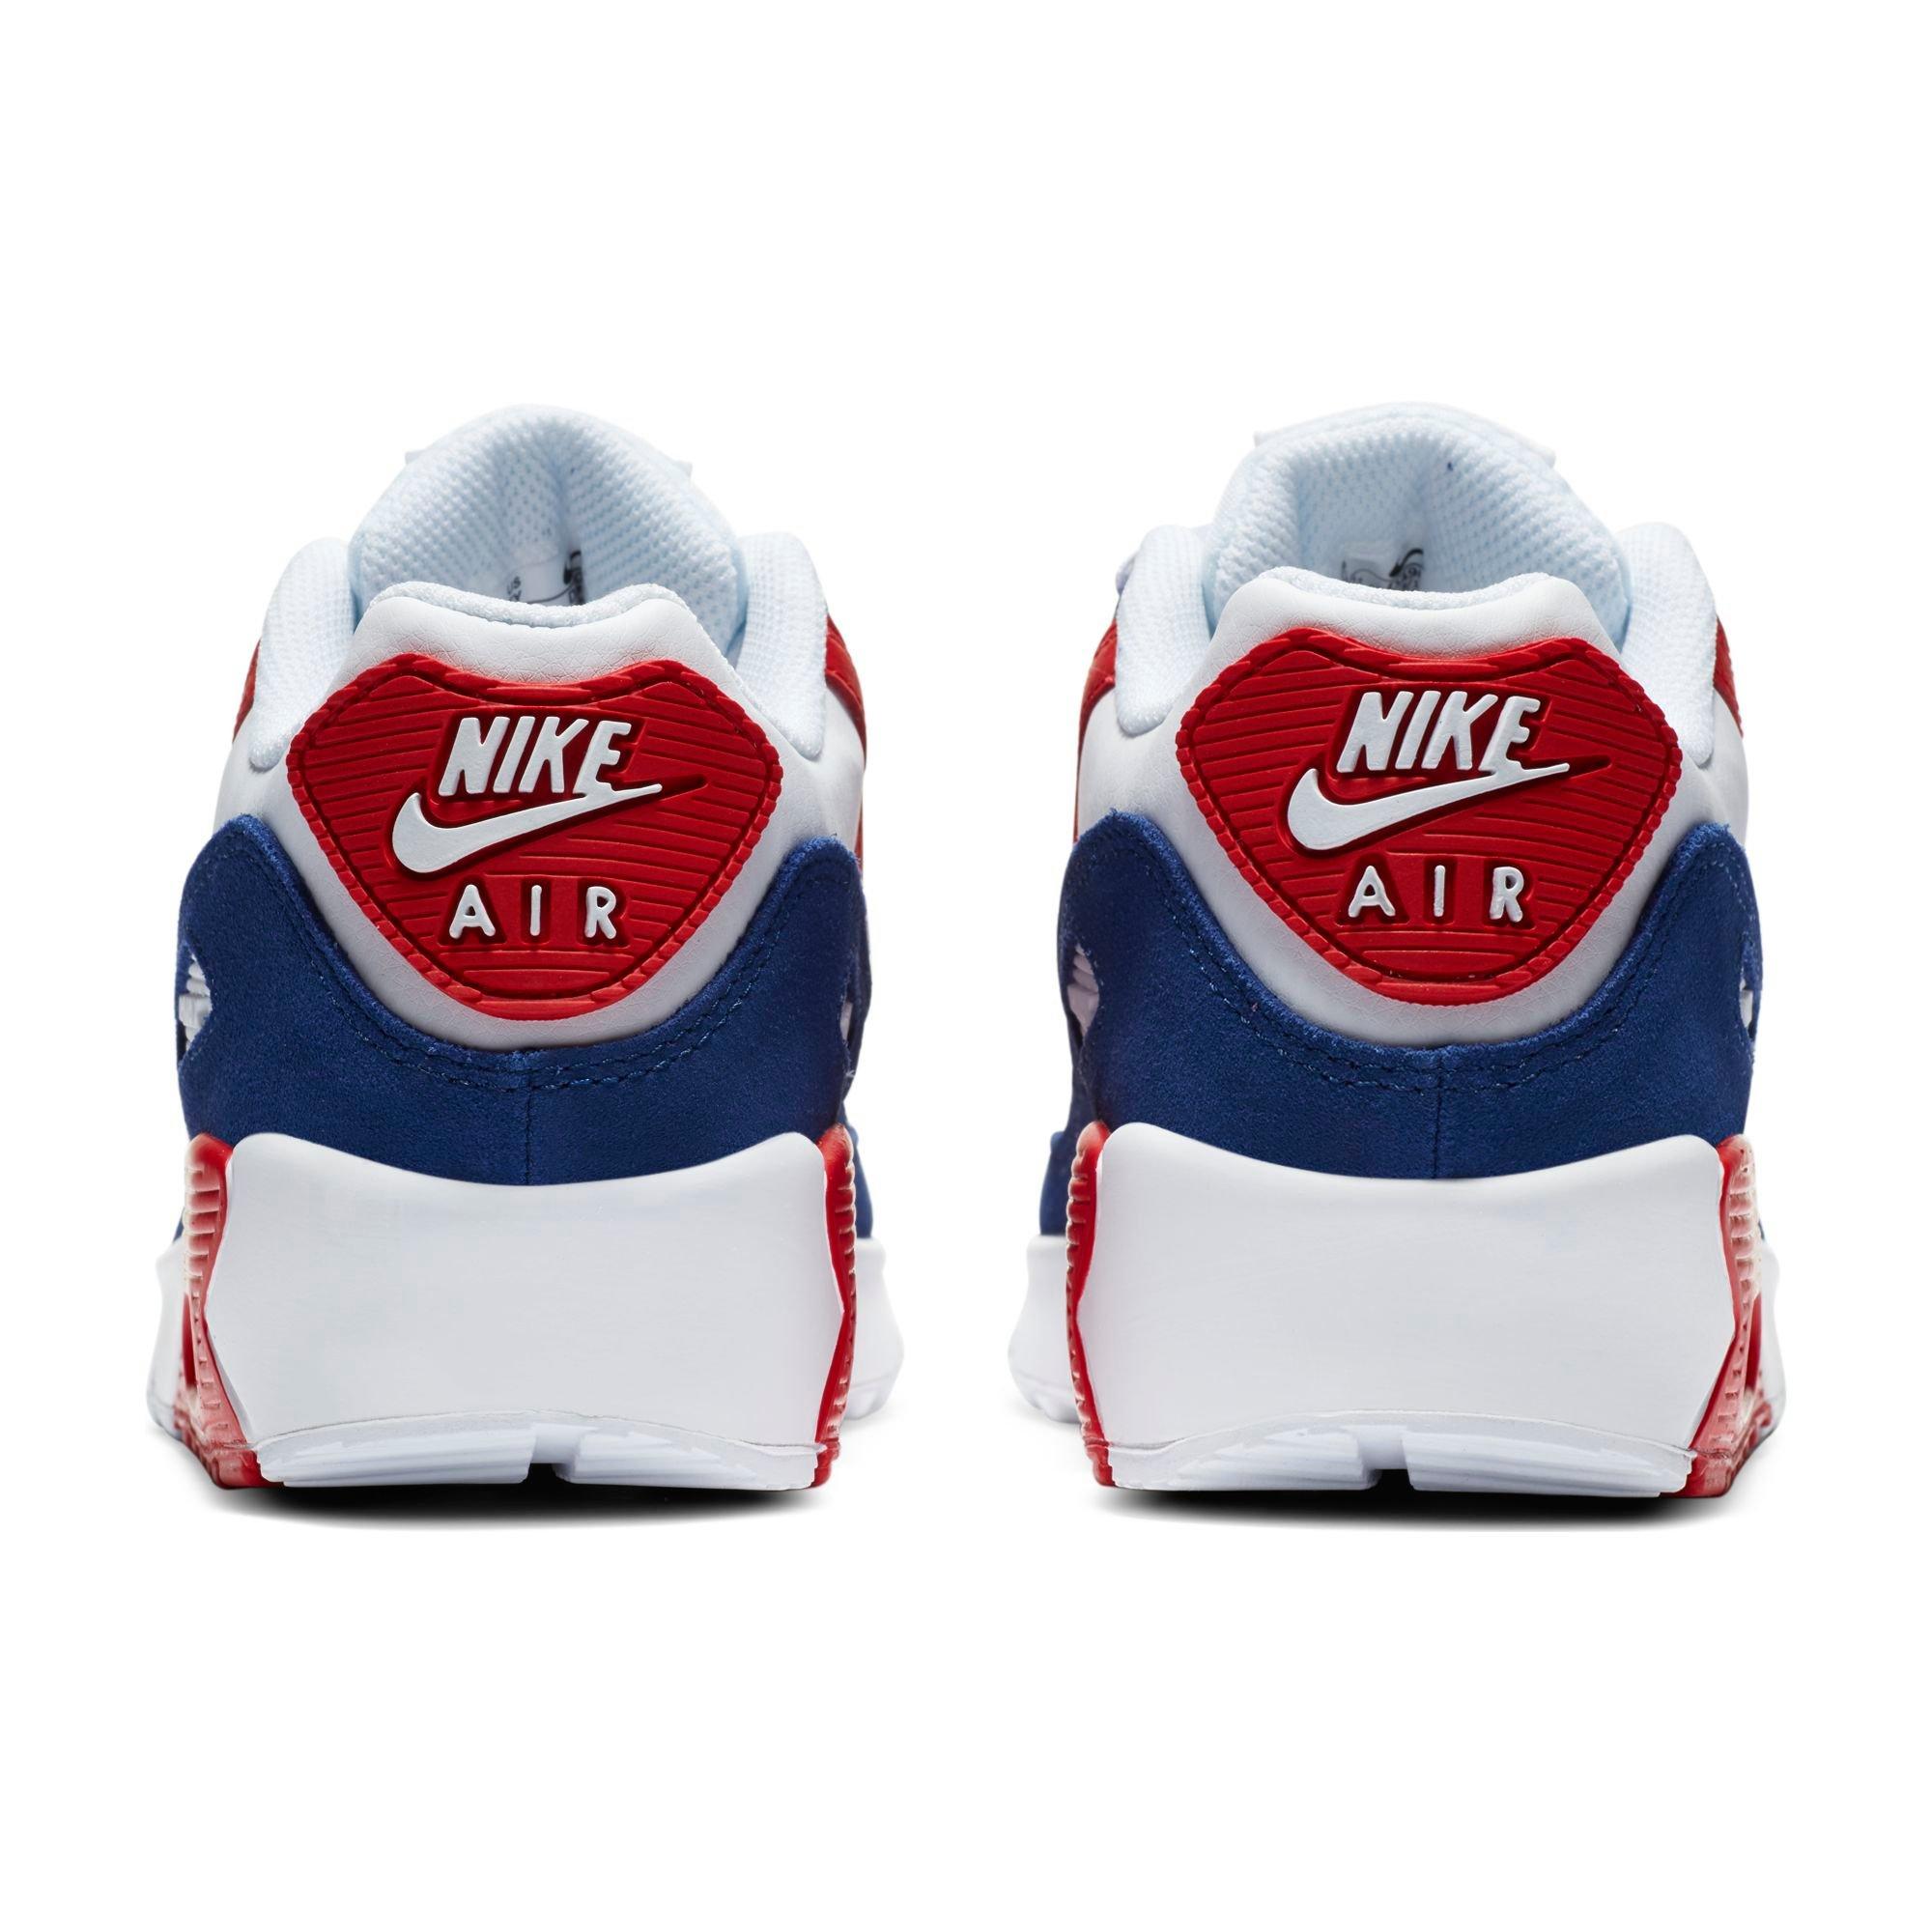 white red and blue air max